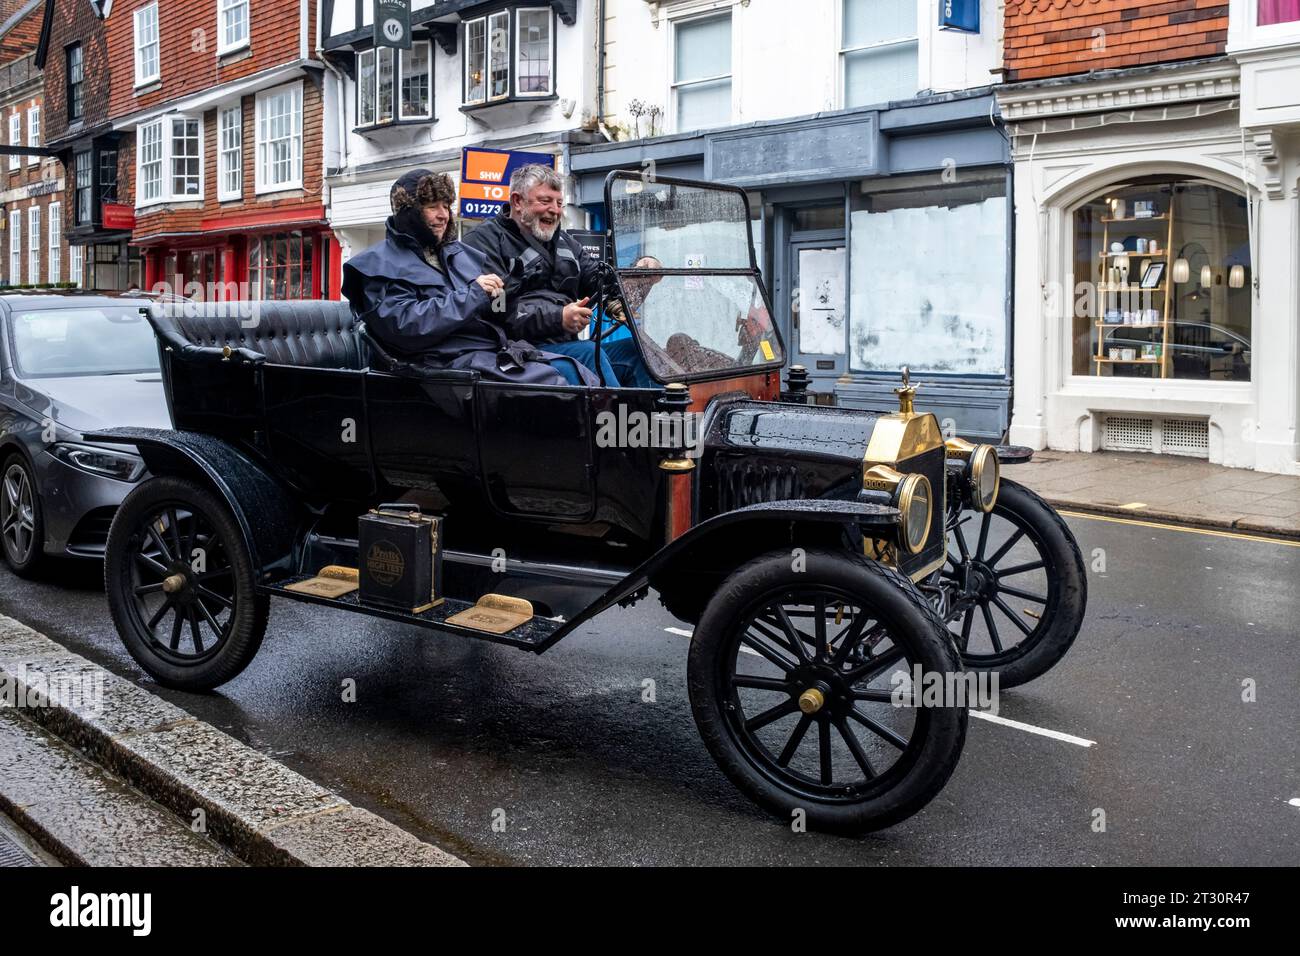 A Senior Couple Driving A Classic Car During Some Bad Weather, High Street, Lewes, East Sussex, UK. Stock Photo